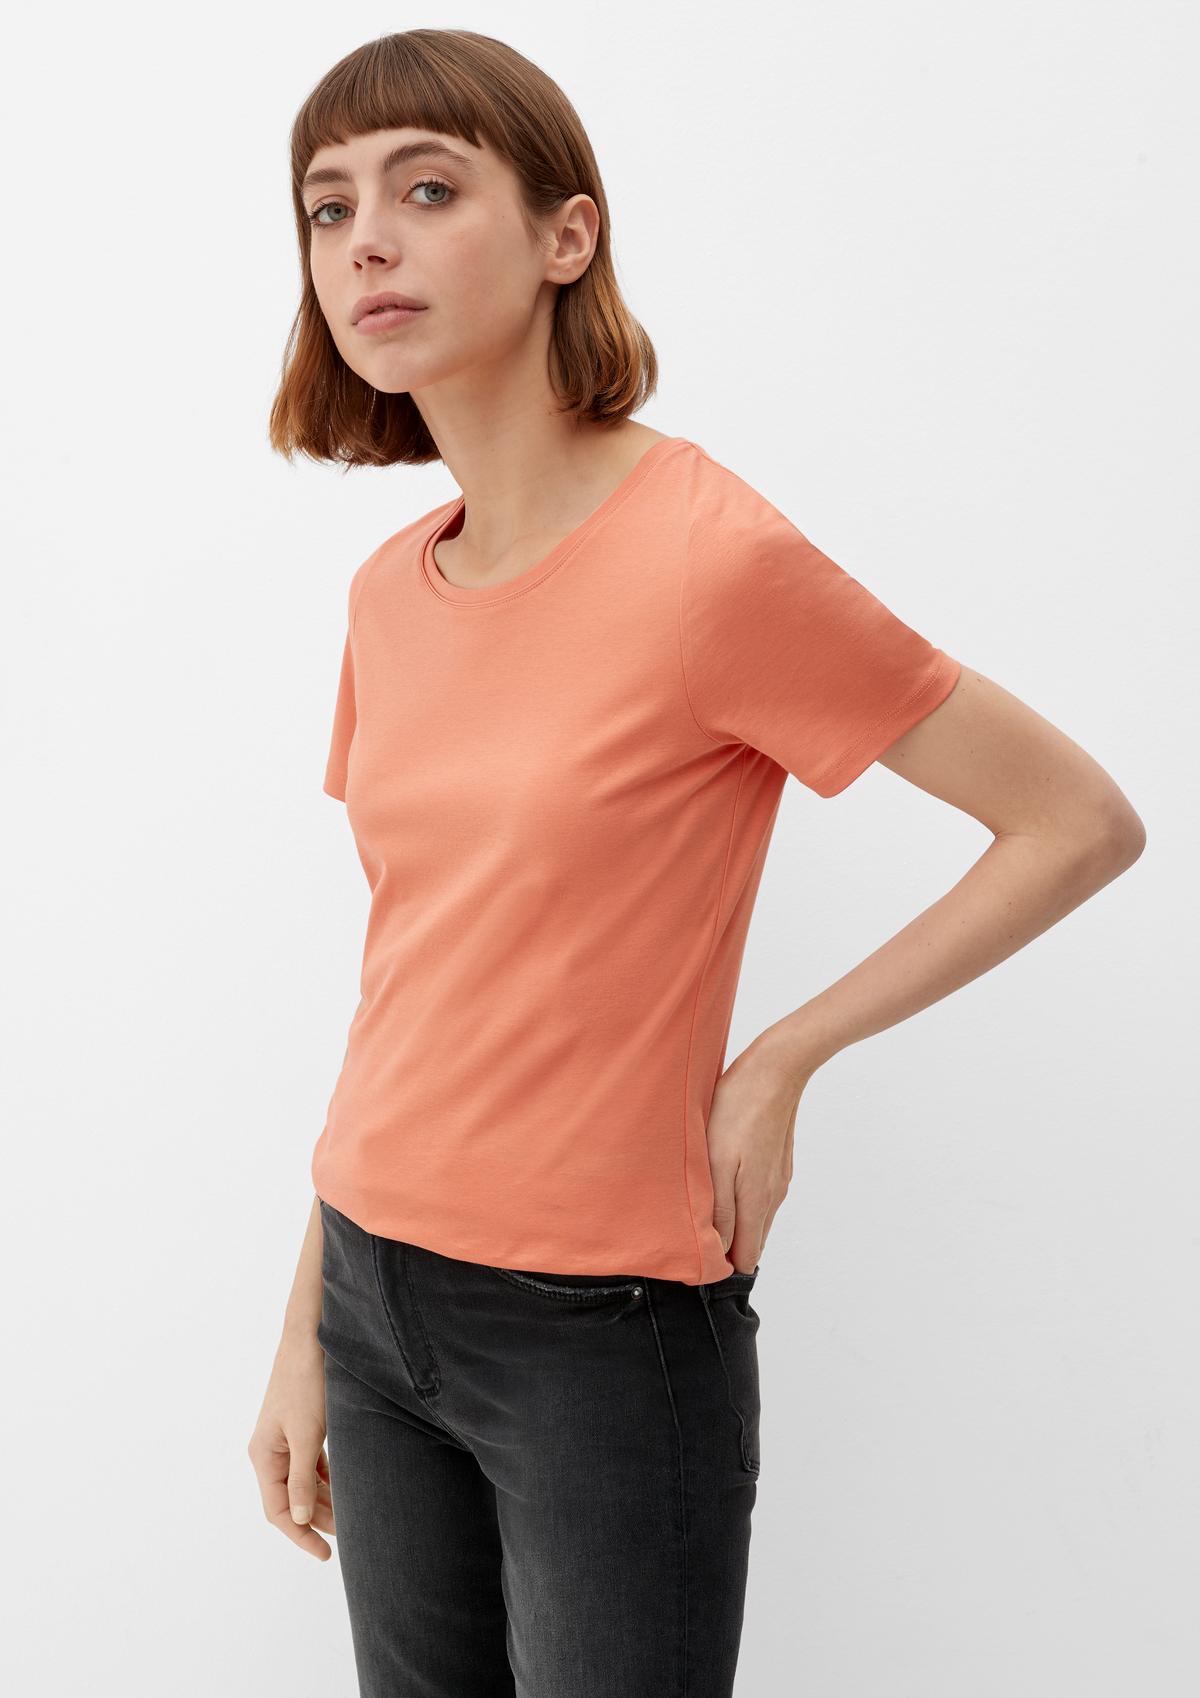 T-shirt in a slim fit